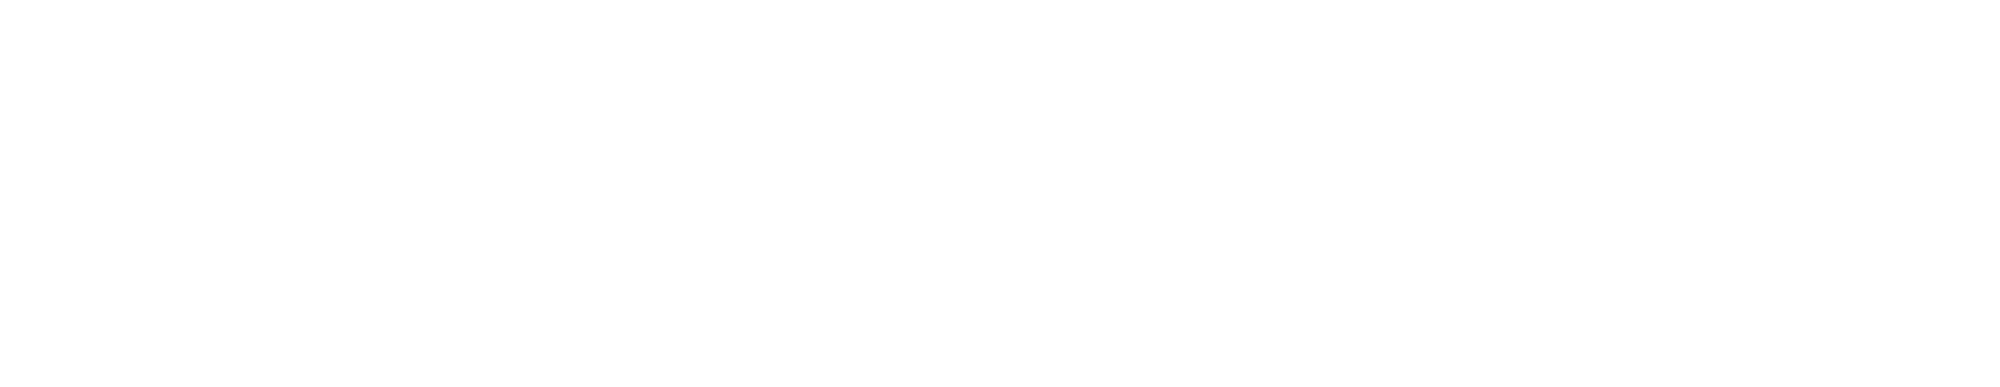 2000px-Casio_logo white.png